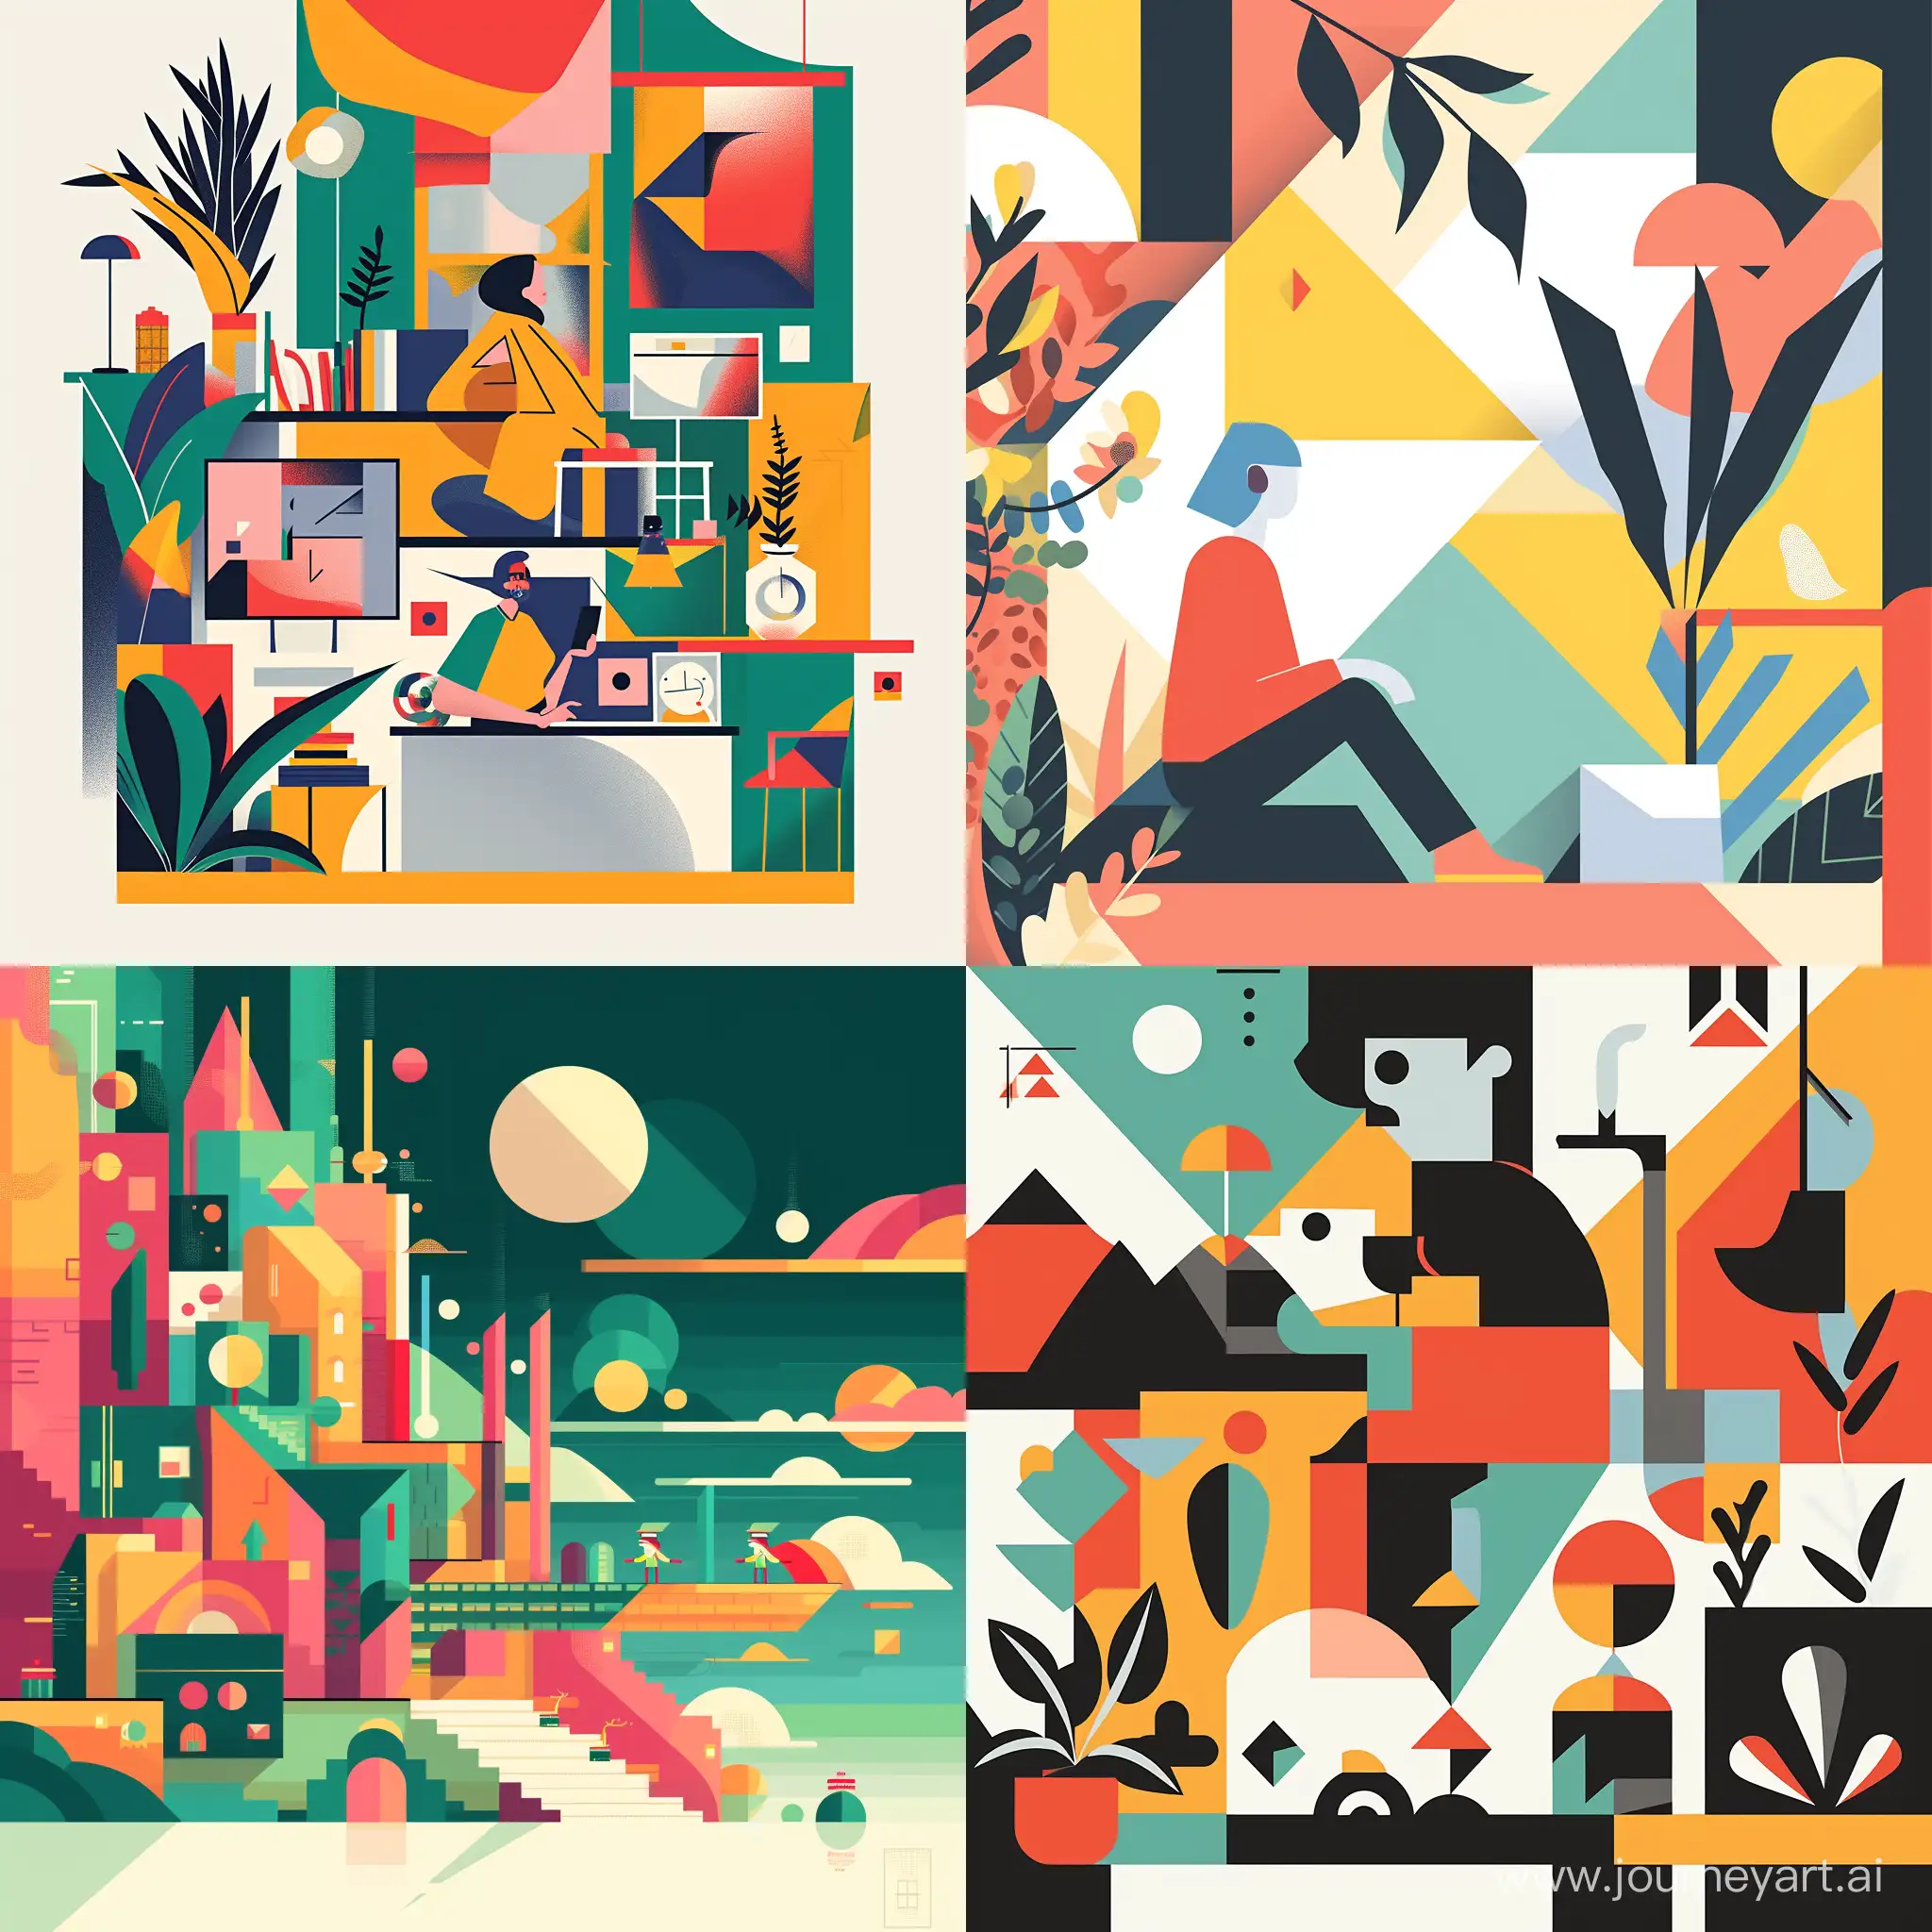 Modern-Flat-Design-Illustration-with-Vibrant-Colors-and-Geometric-Shapes